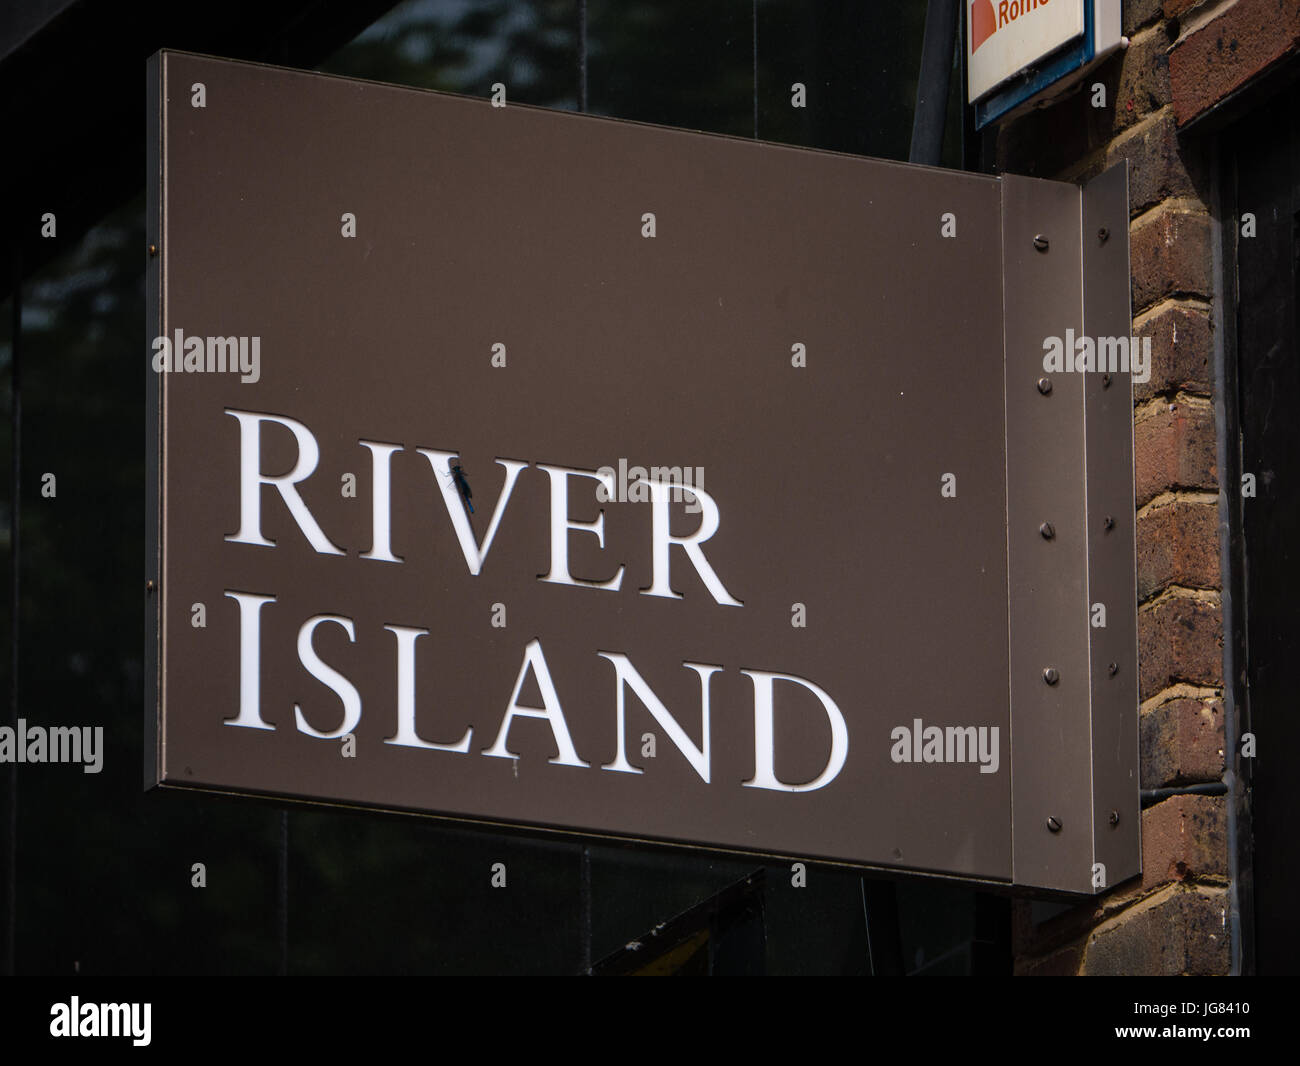 Sign for River Island, High Street Fashion Brand, Reading, Berkshire, England Stock Photo